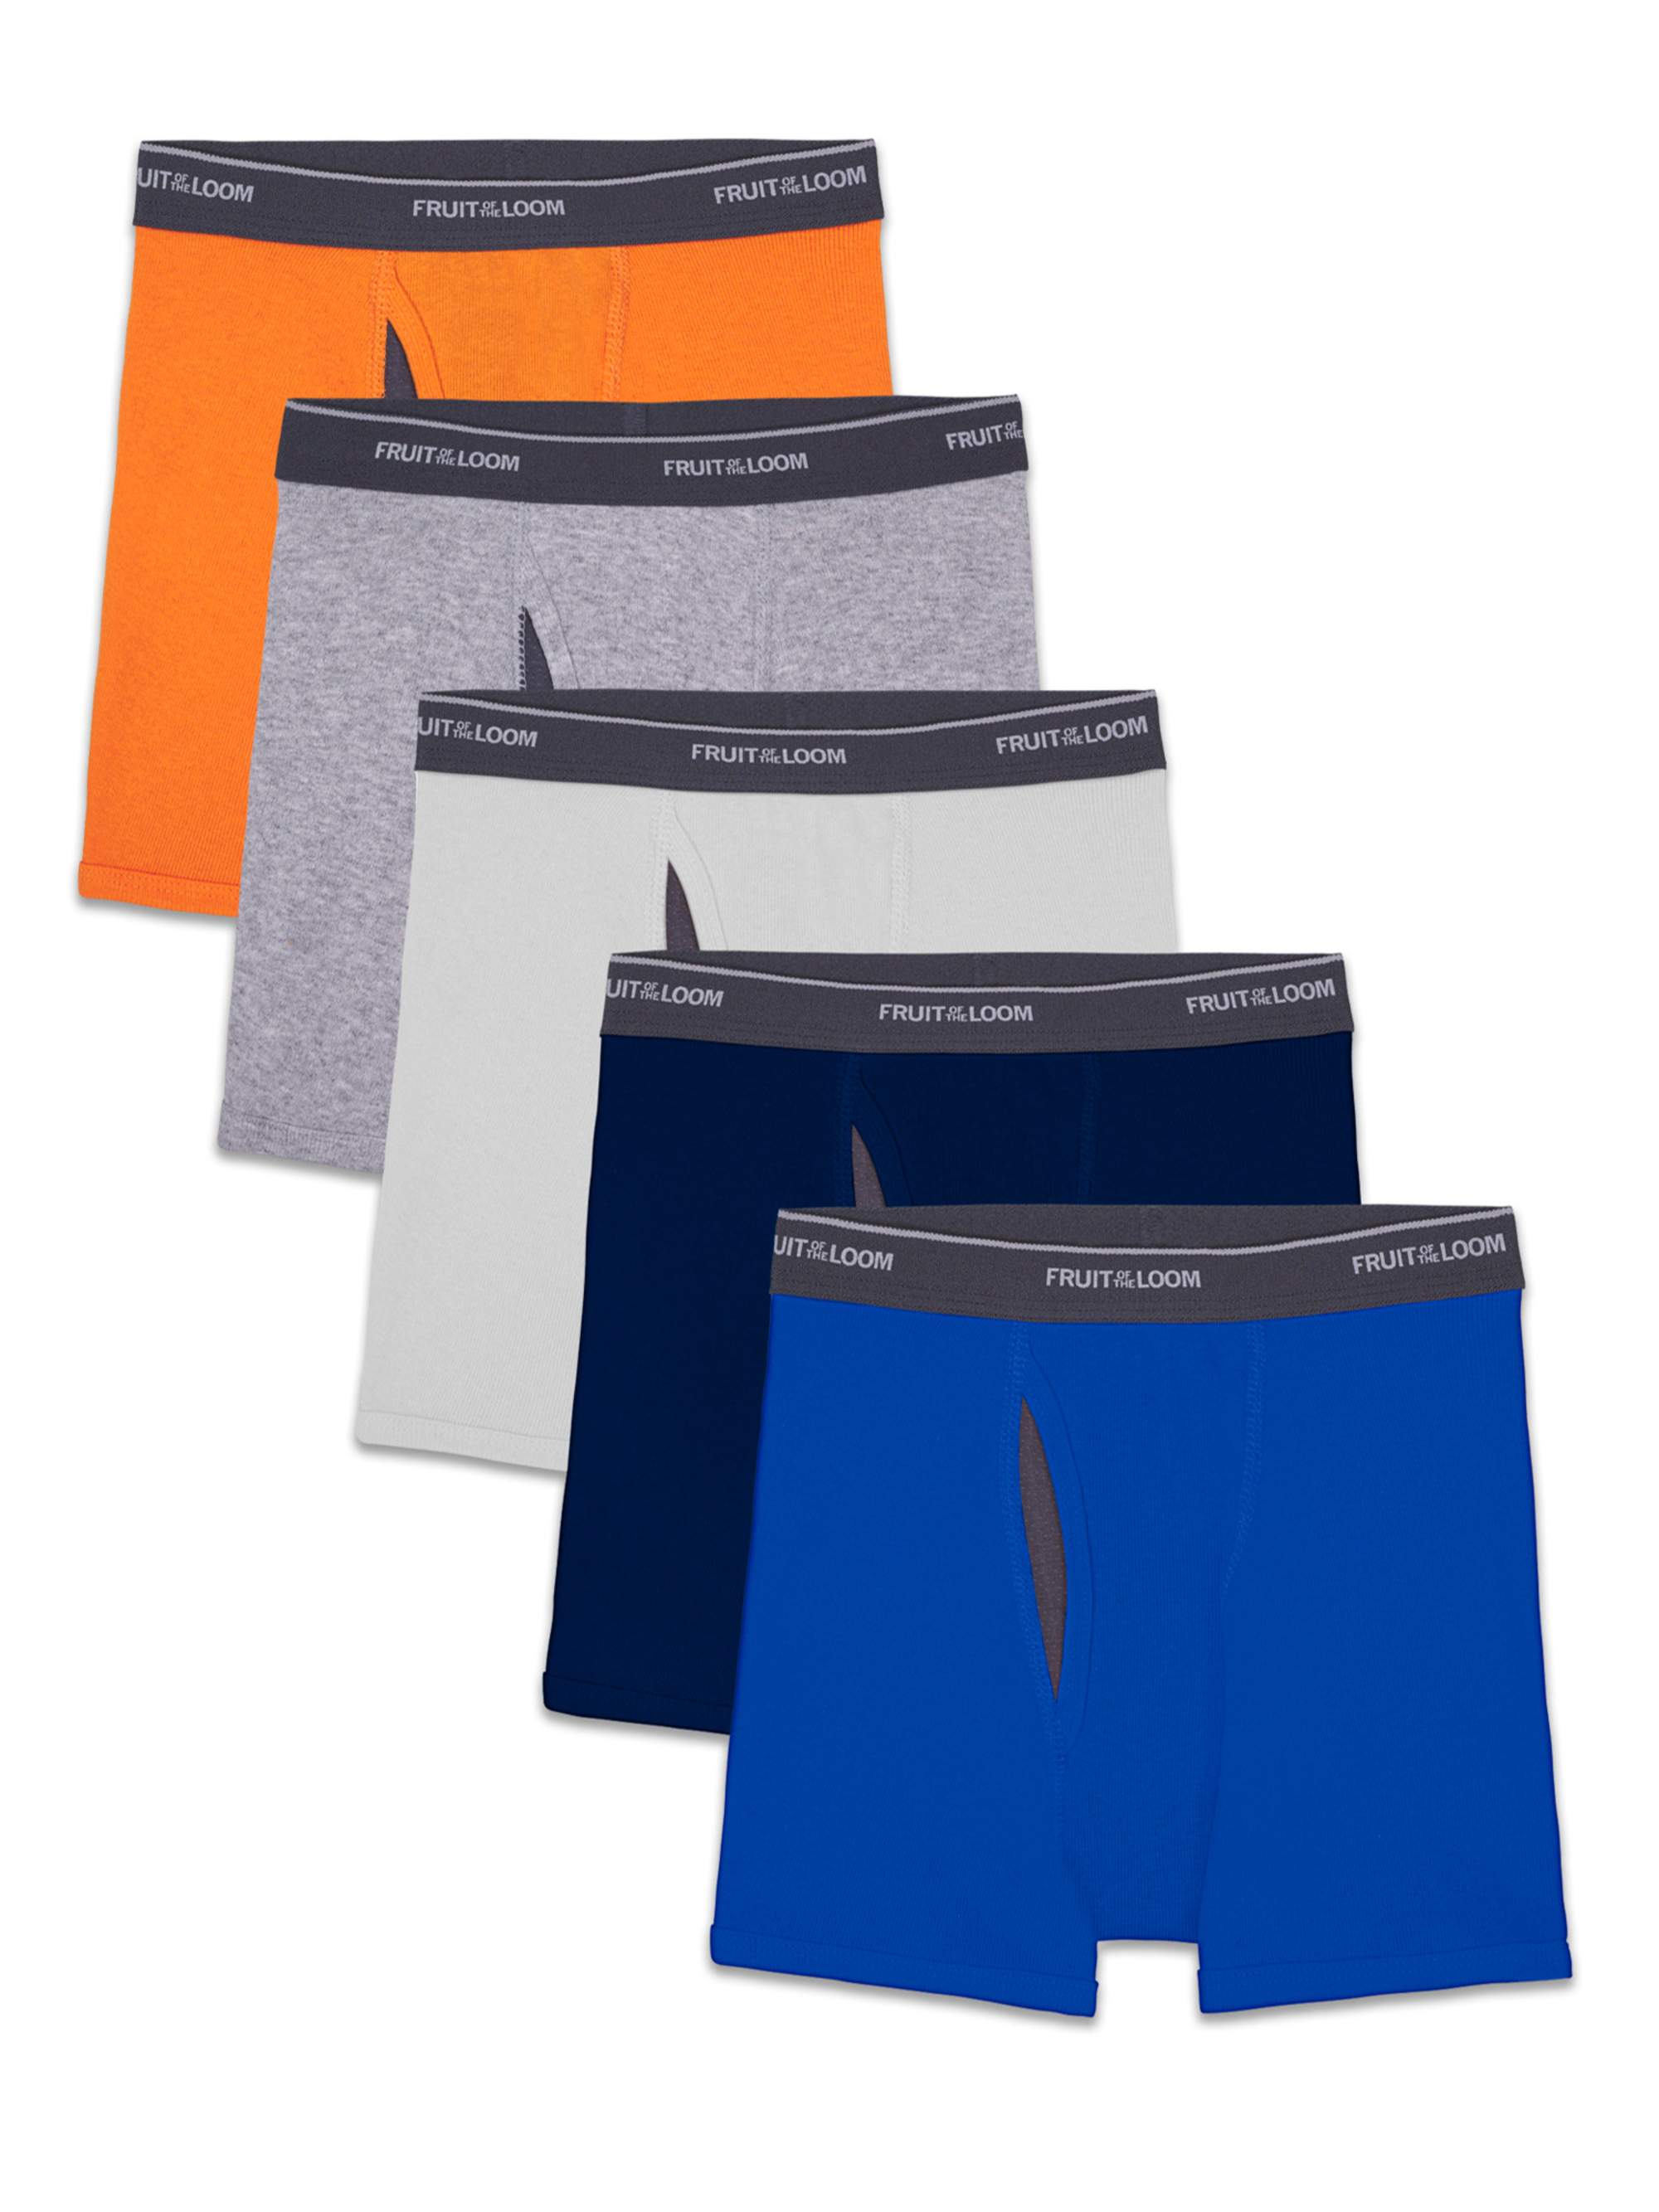 Fruit of the Loom Boys' CoolZone Boxer Briefs, 5 Pack - image 1 of 8